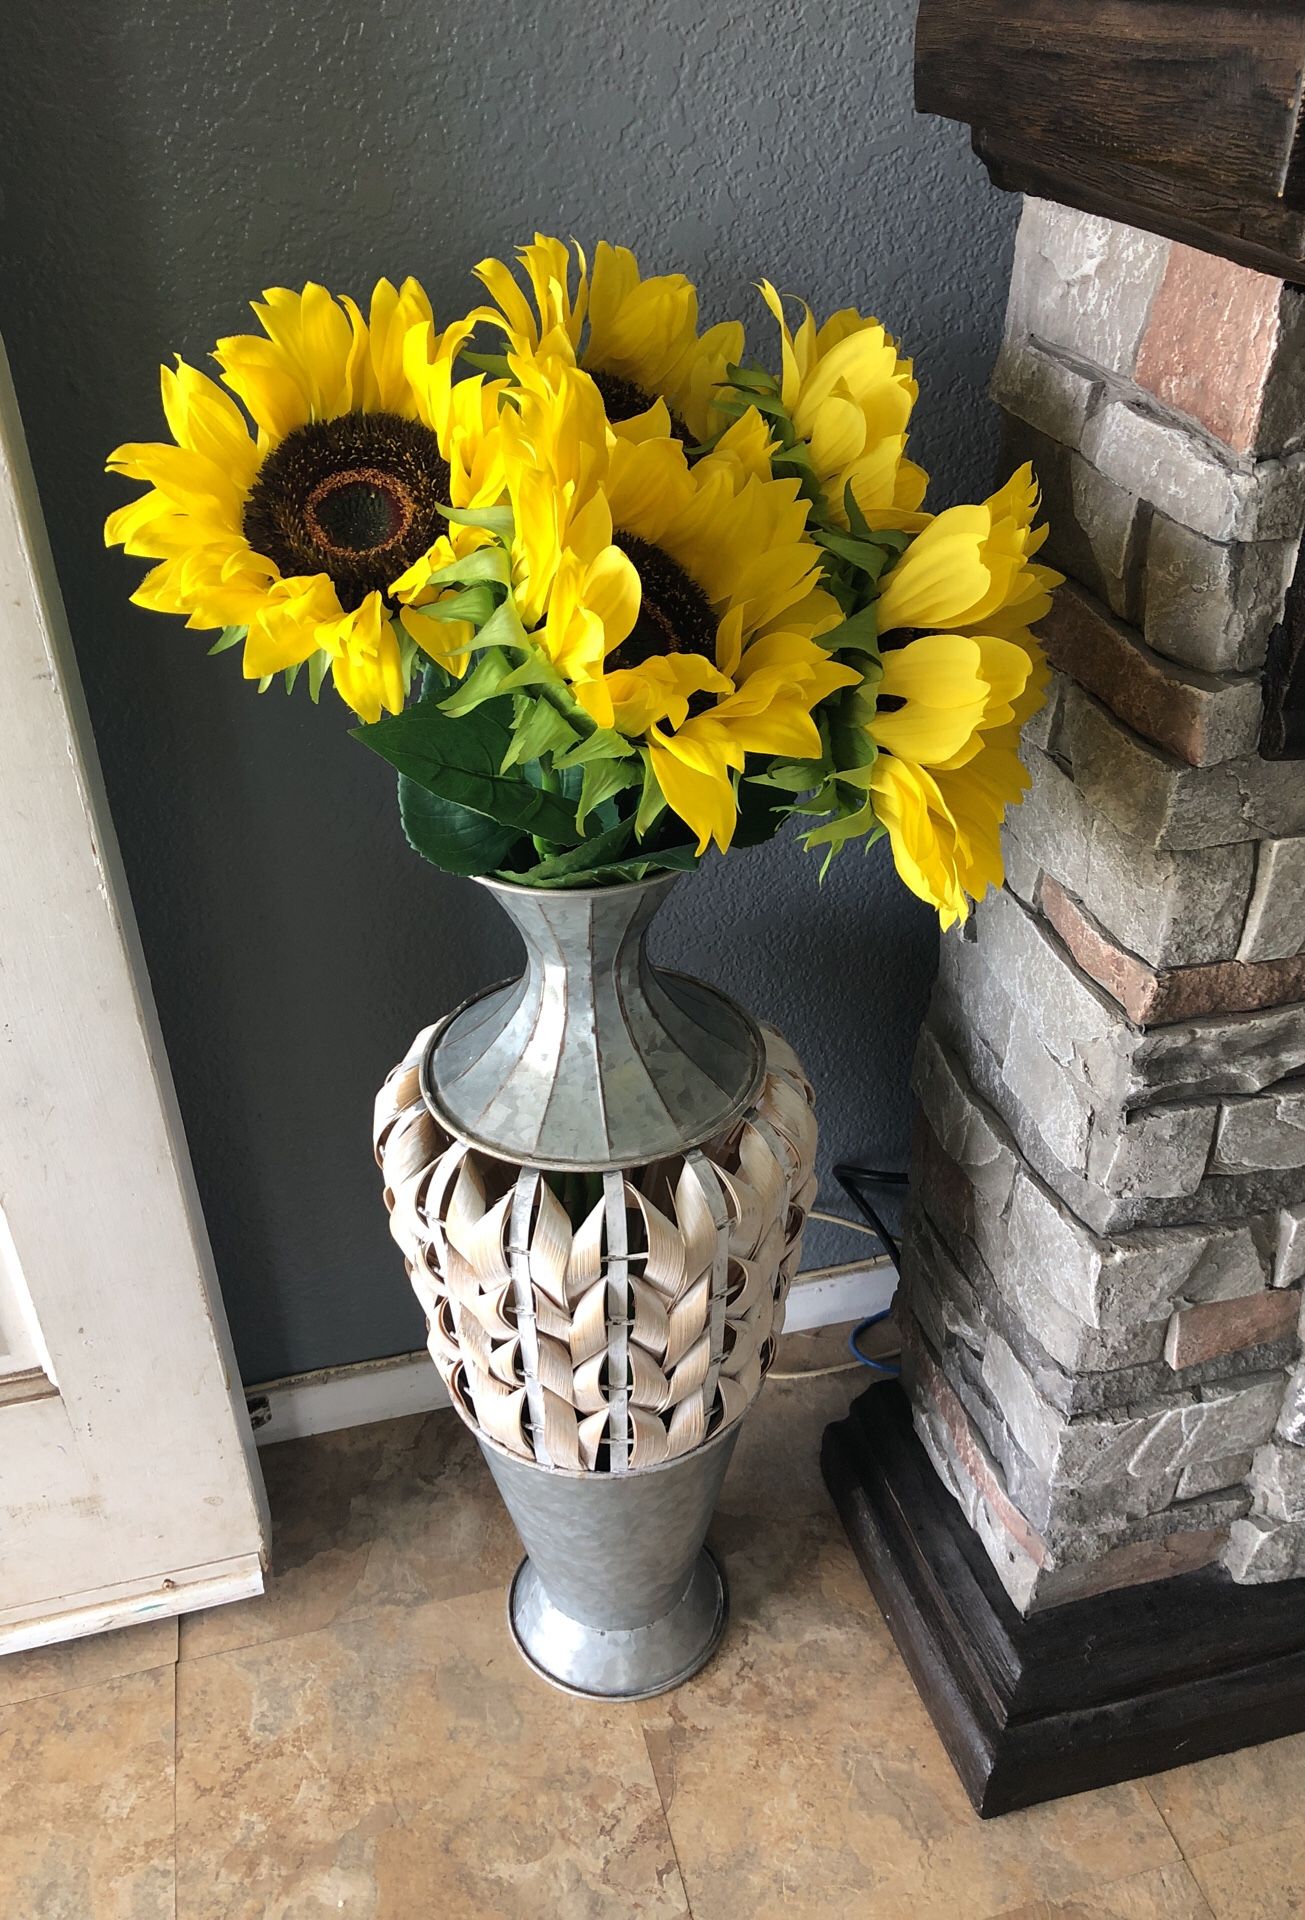 Large vase with sunflowers